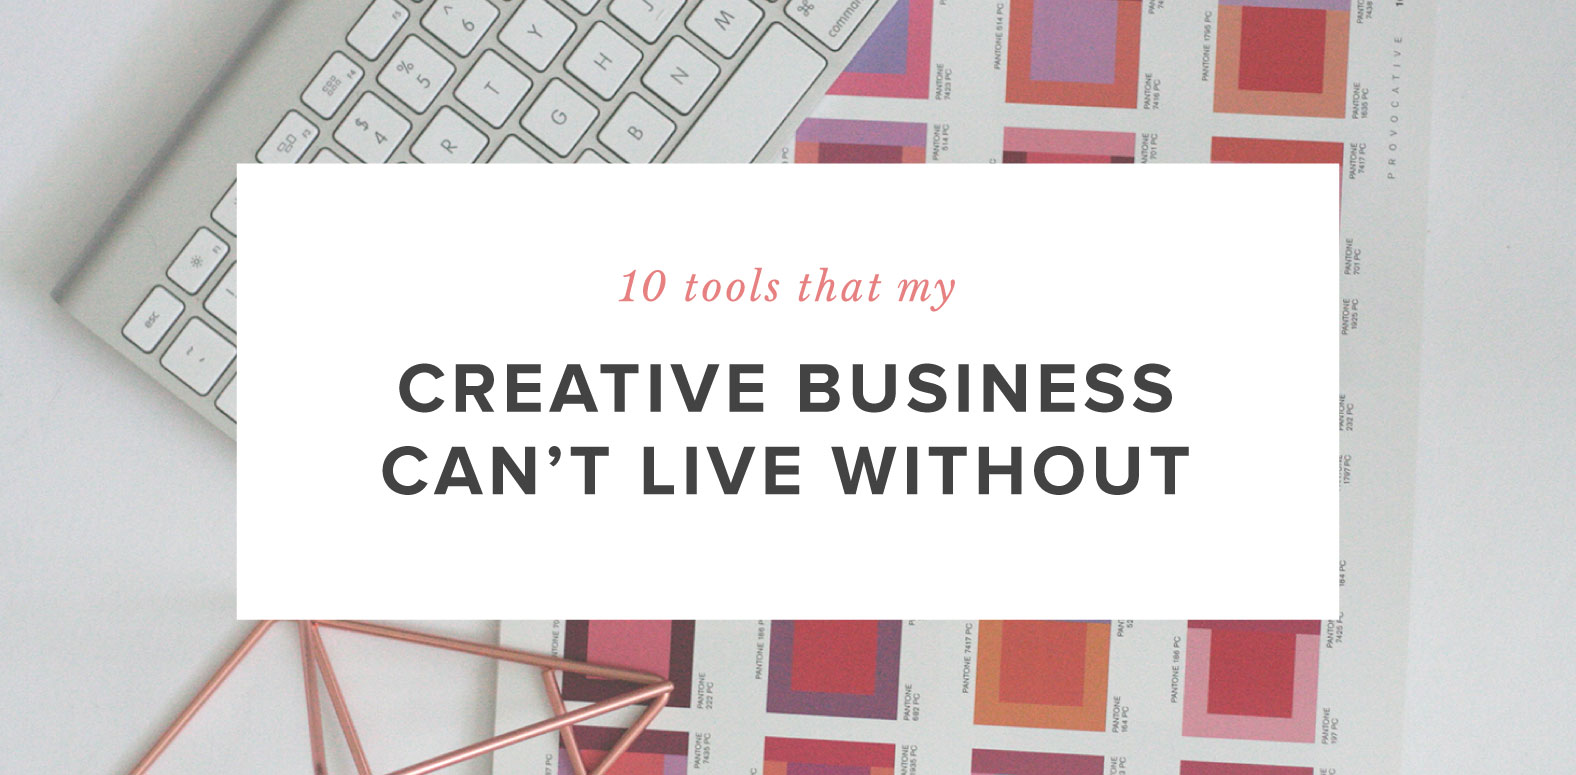 10 Tools that My Creative Business Can’t Live Without